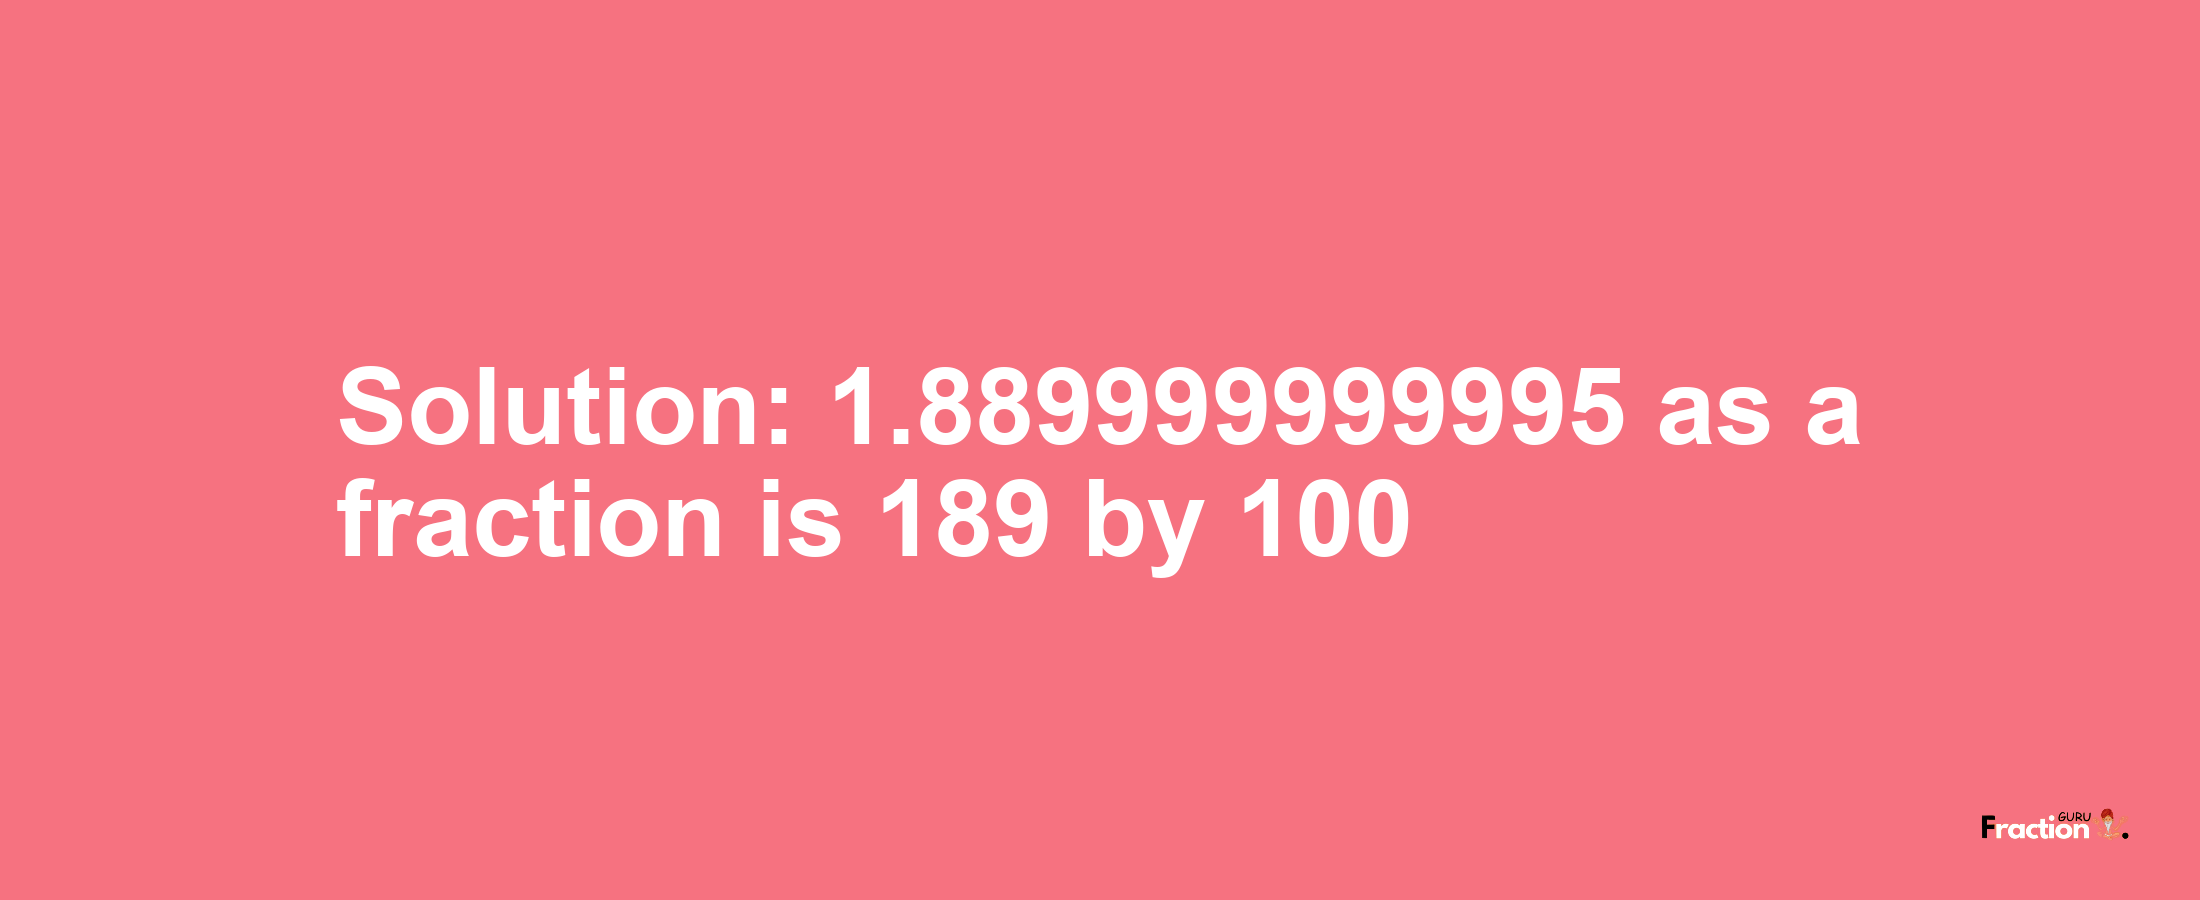 Solution:1.889999999995 as a fraction is 189/100